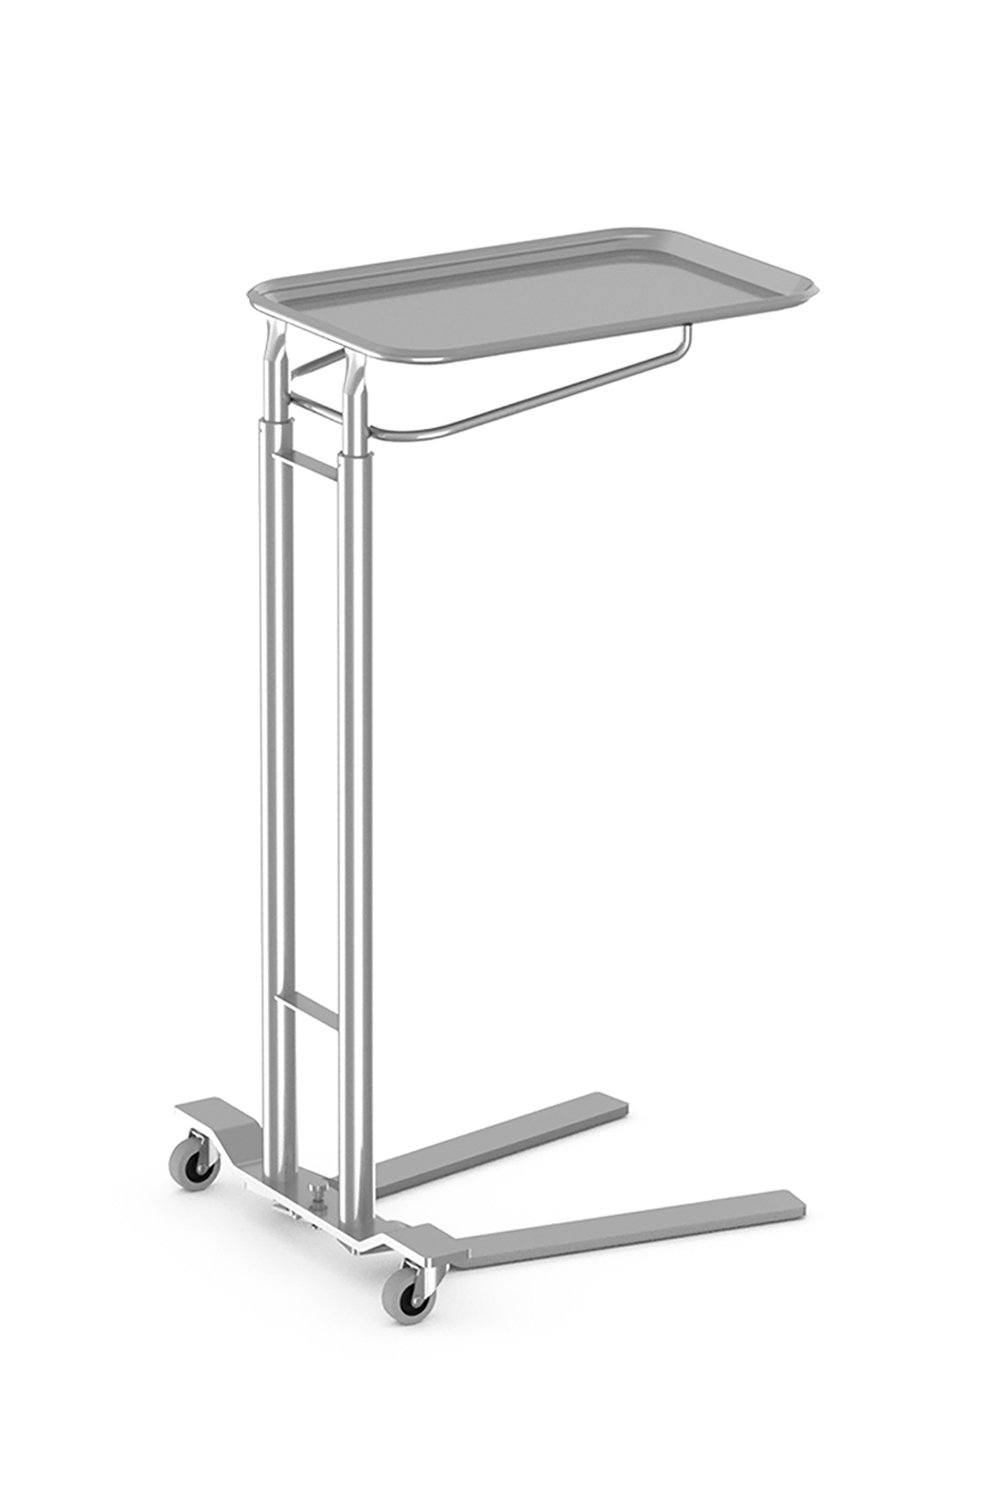 Mayo Stand Stainless Solutions Acart 19-1/8" x 12-5/8" x 36"W-58"H Foot Operated 13" x 19"